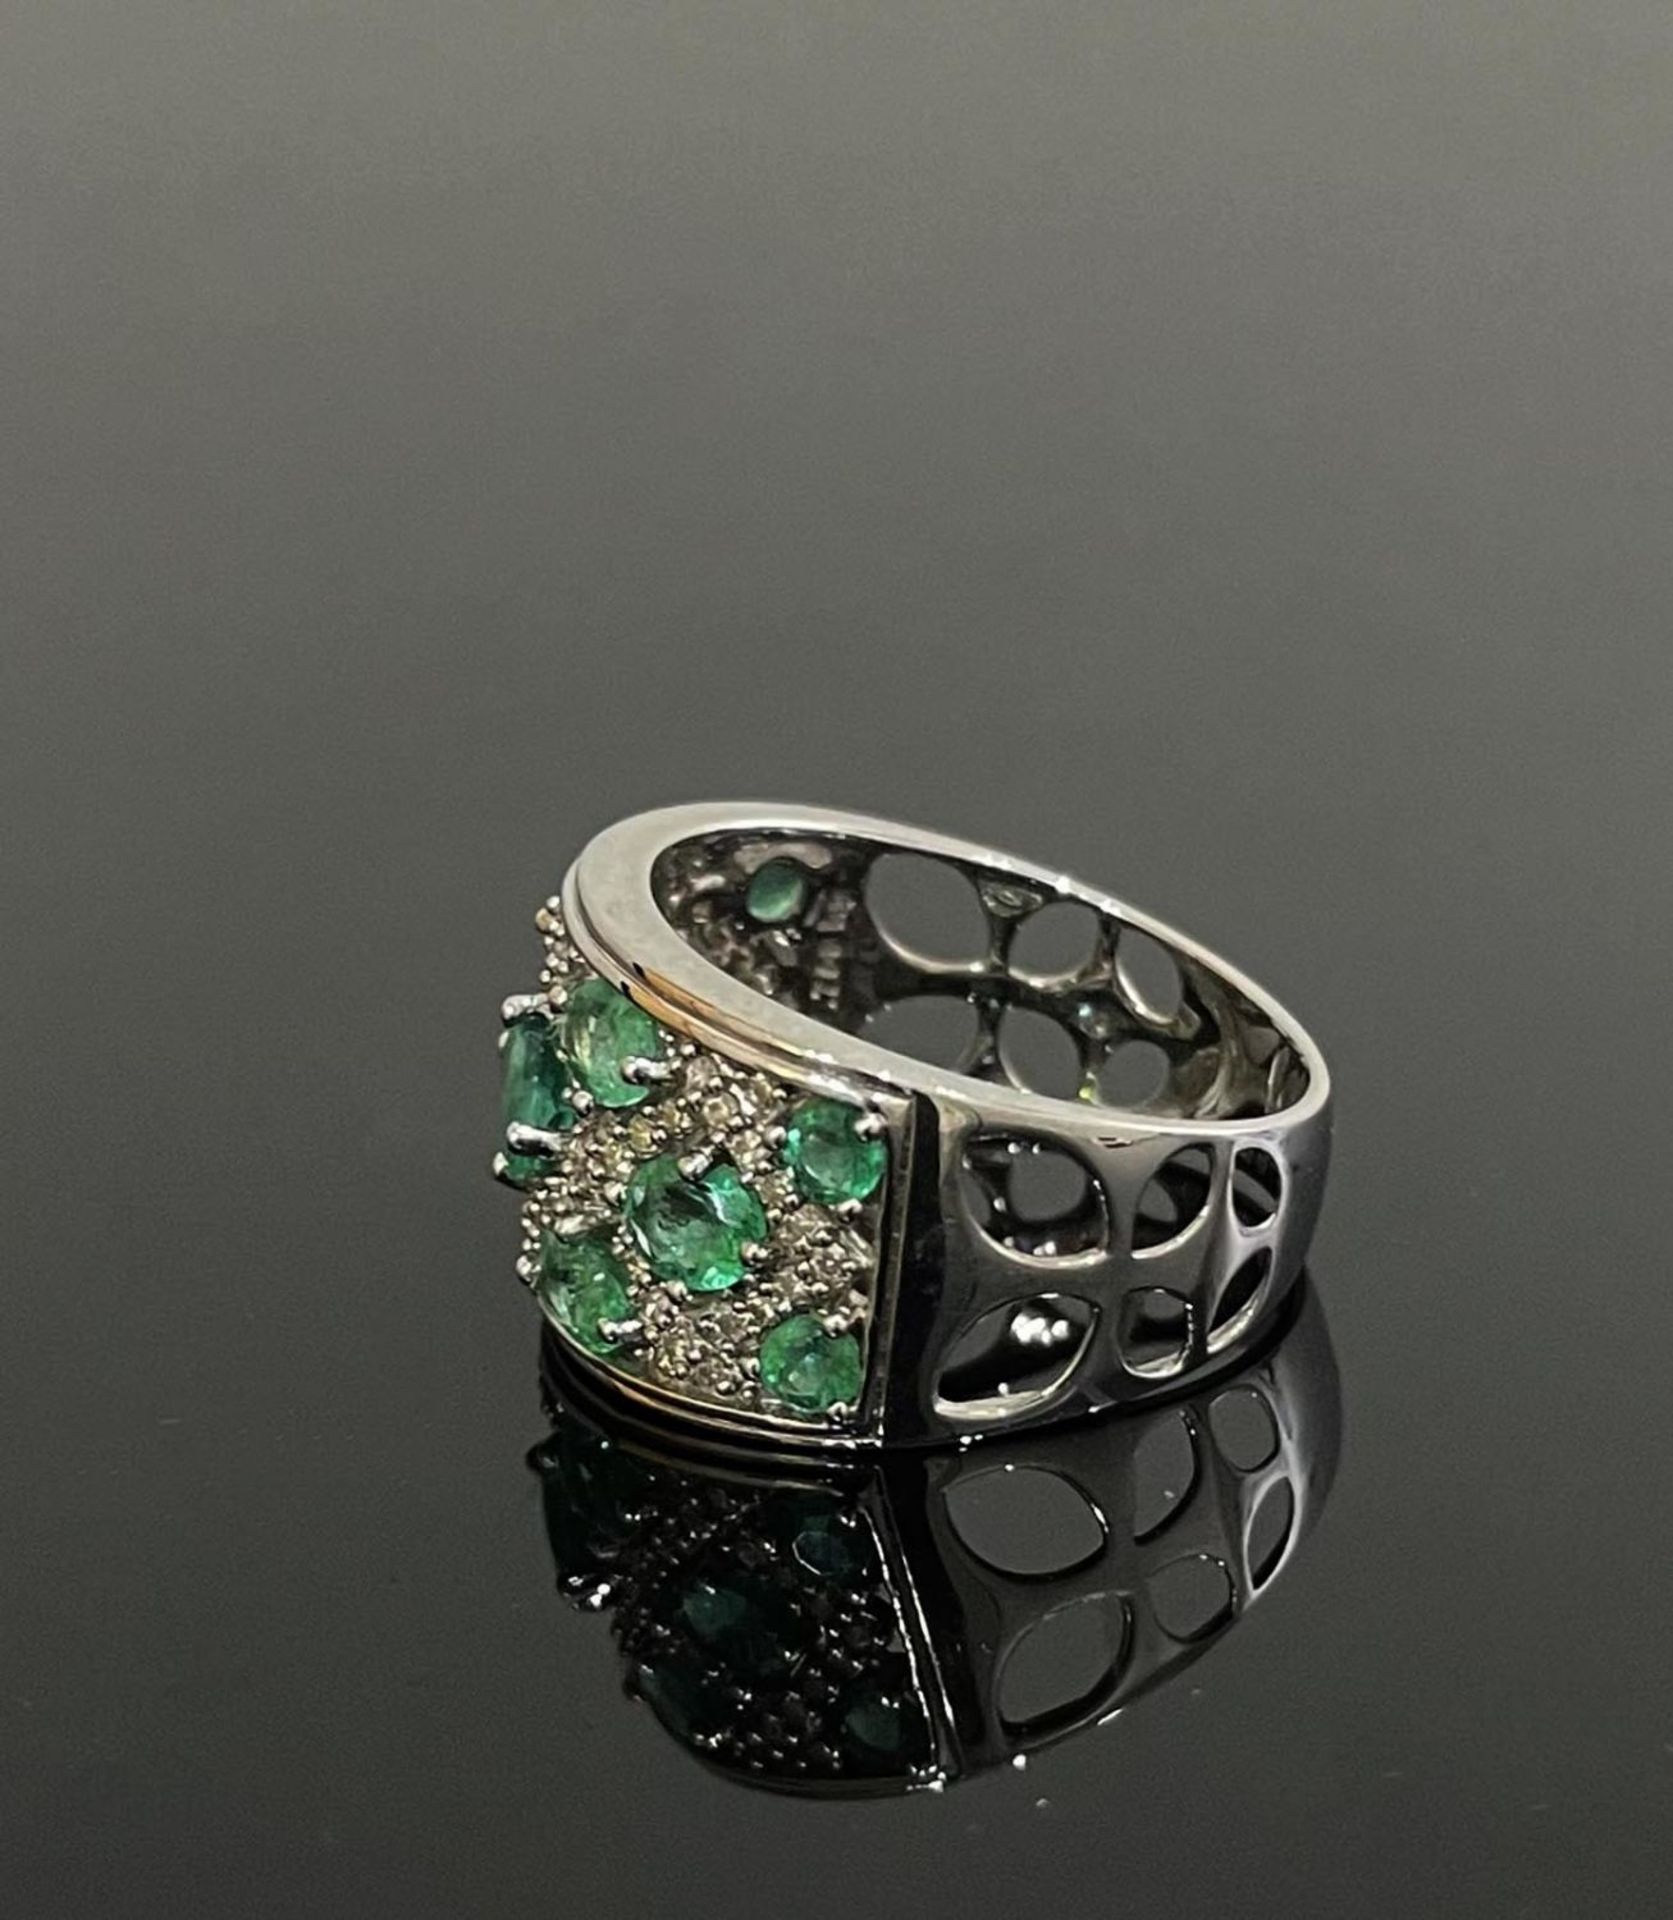 White Gold, Emeralds and Diamonds Ring. - Image 2 of 4